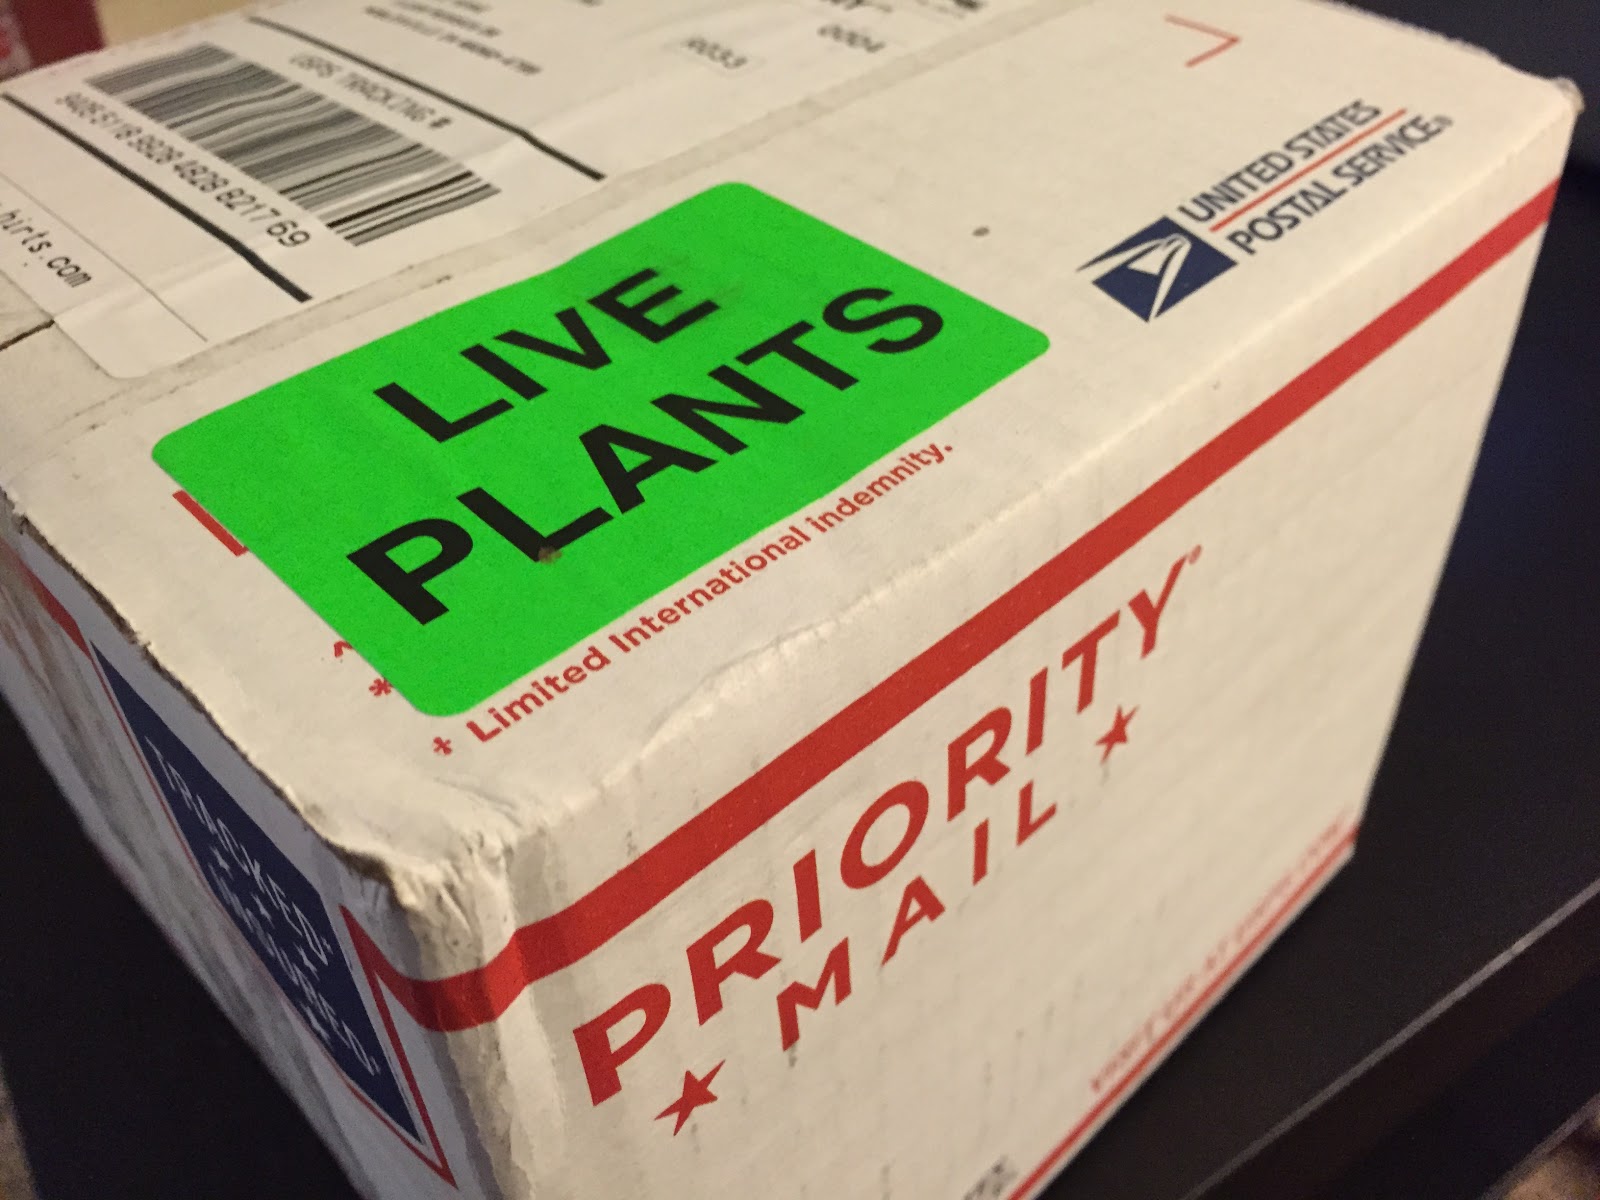 live plants sticker on package